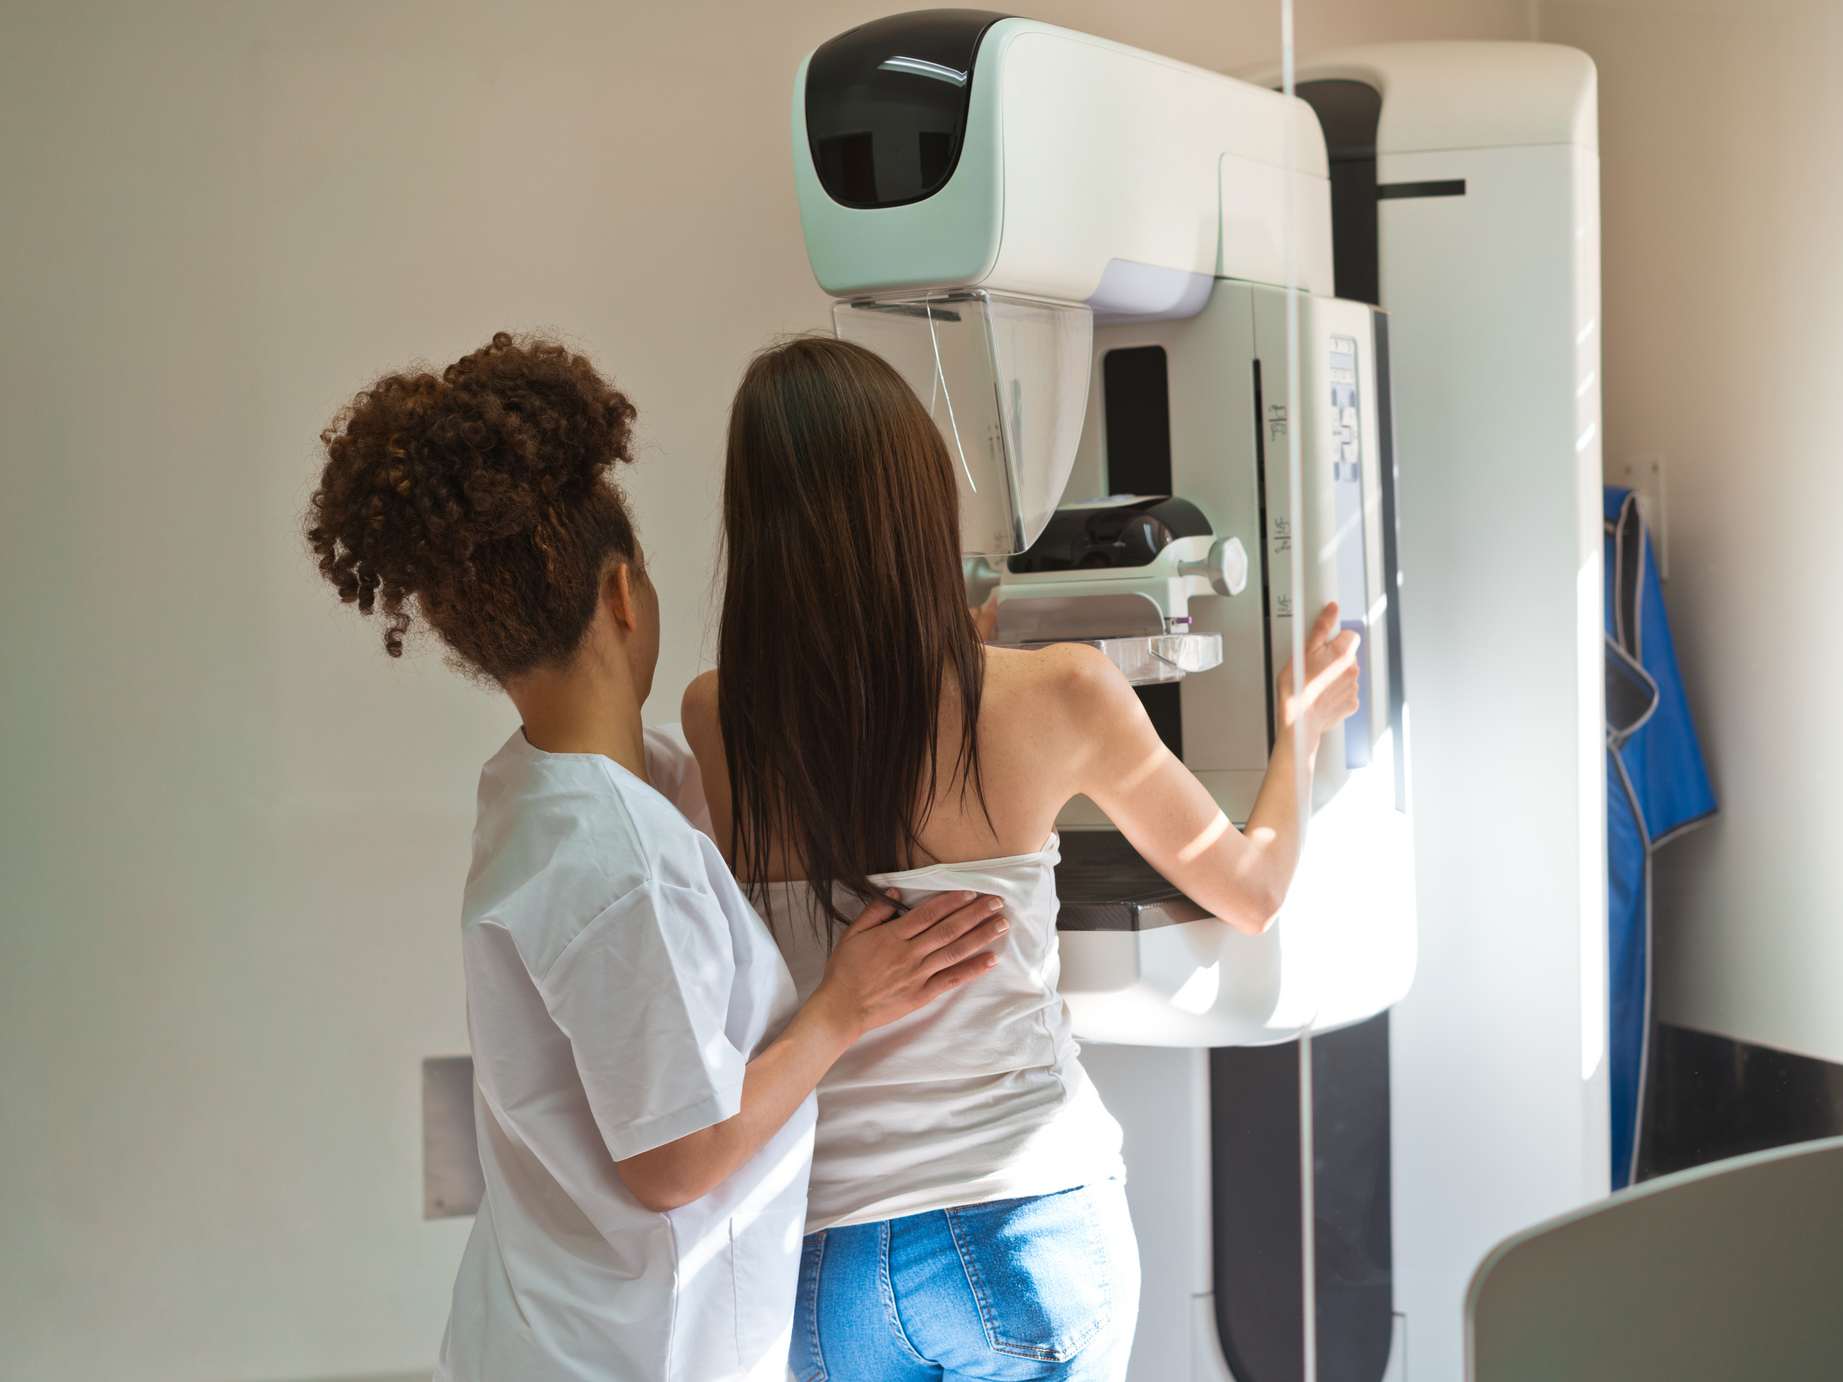 Mammograms should start at age 40, new guidelines recommend